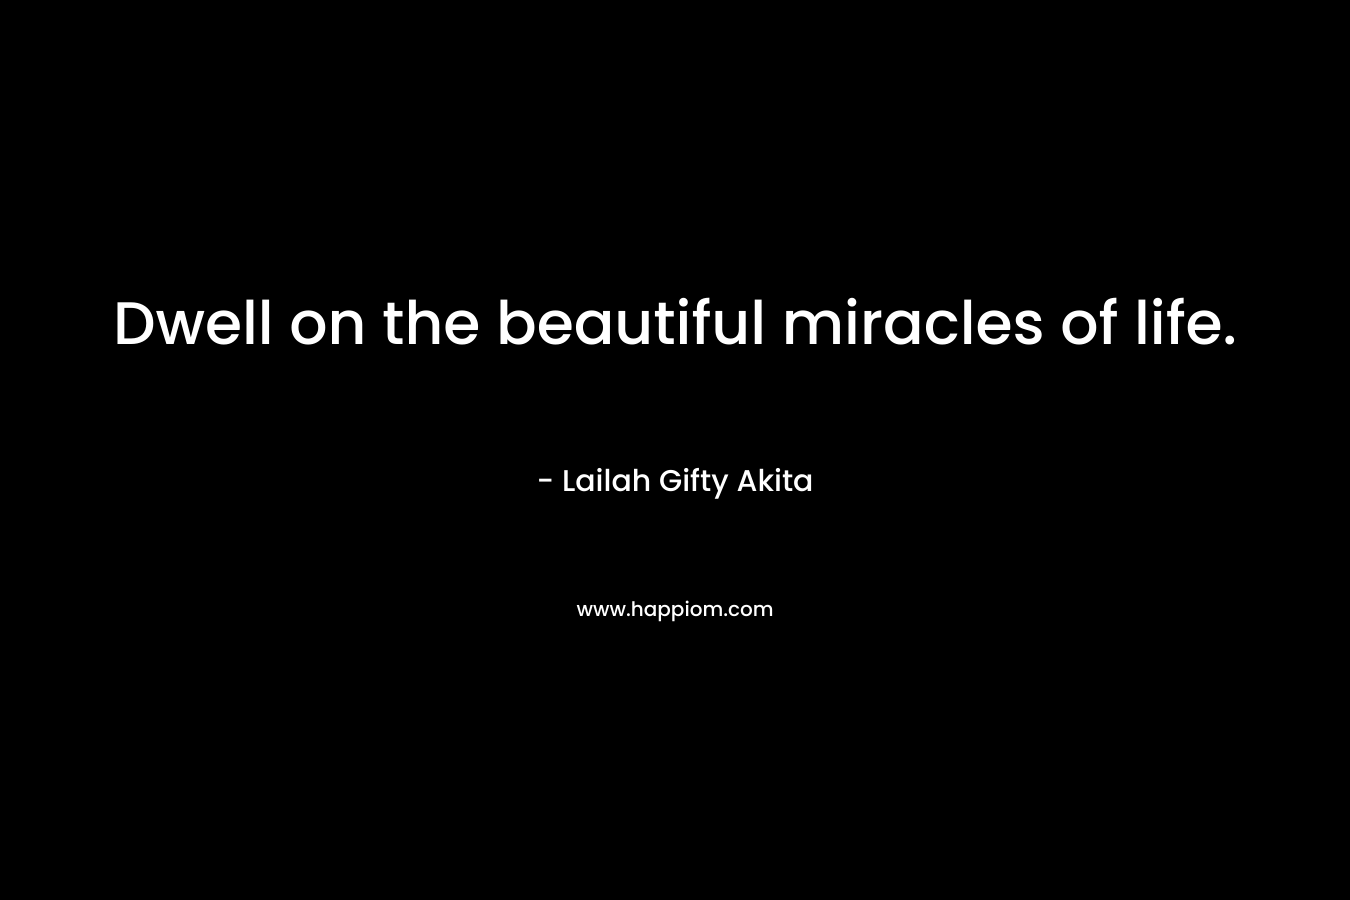 Dwell on the beautiful miracles of life.